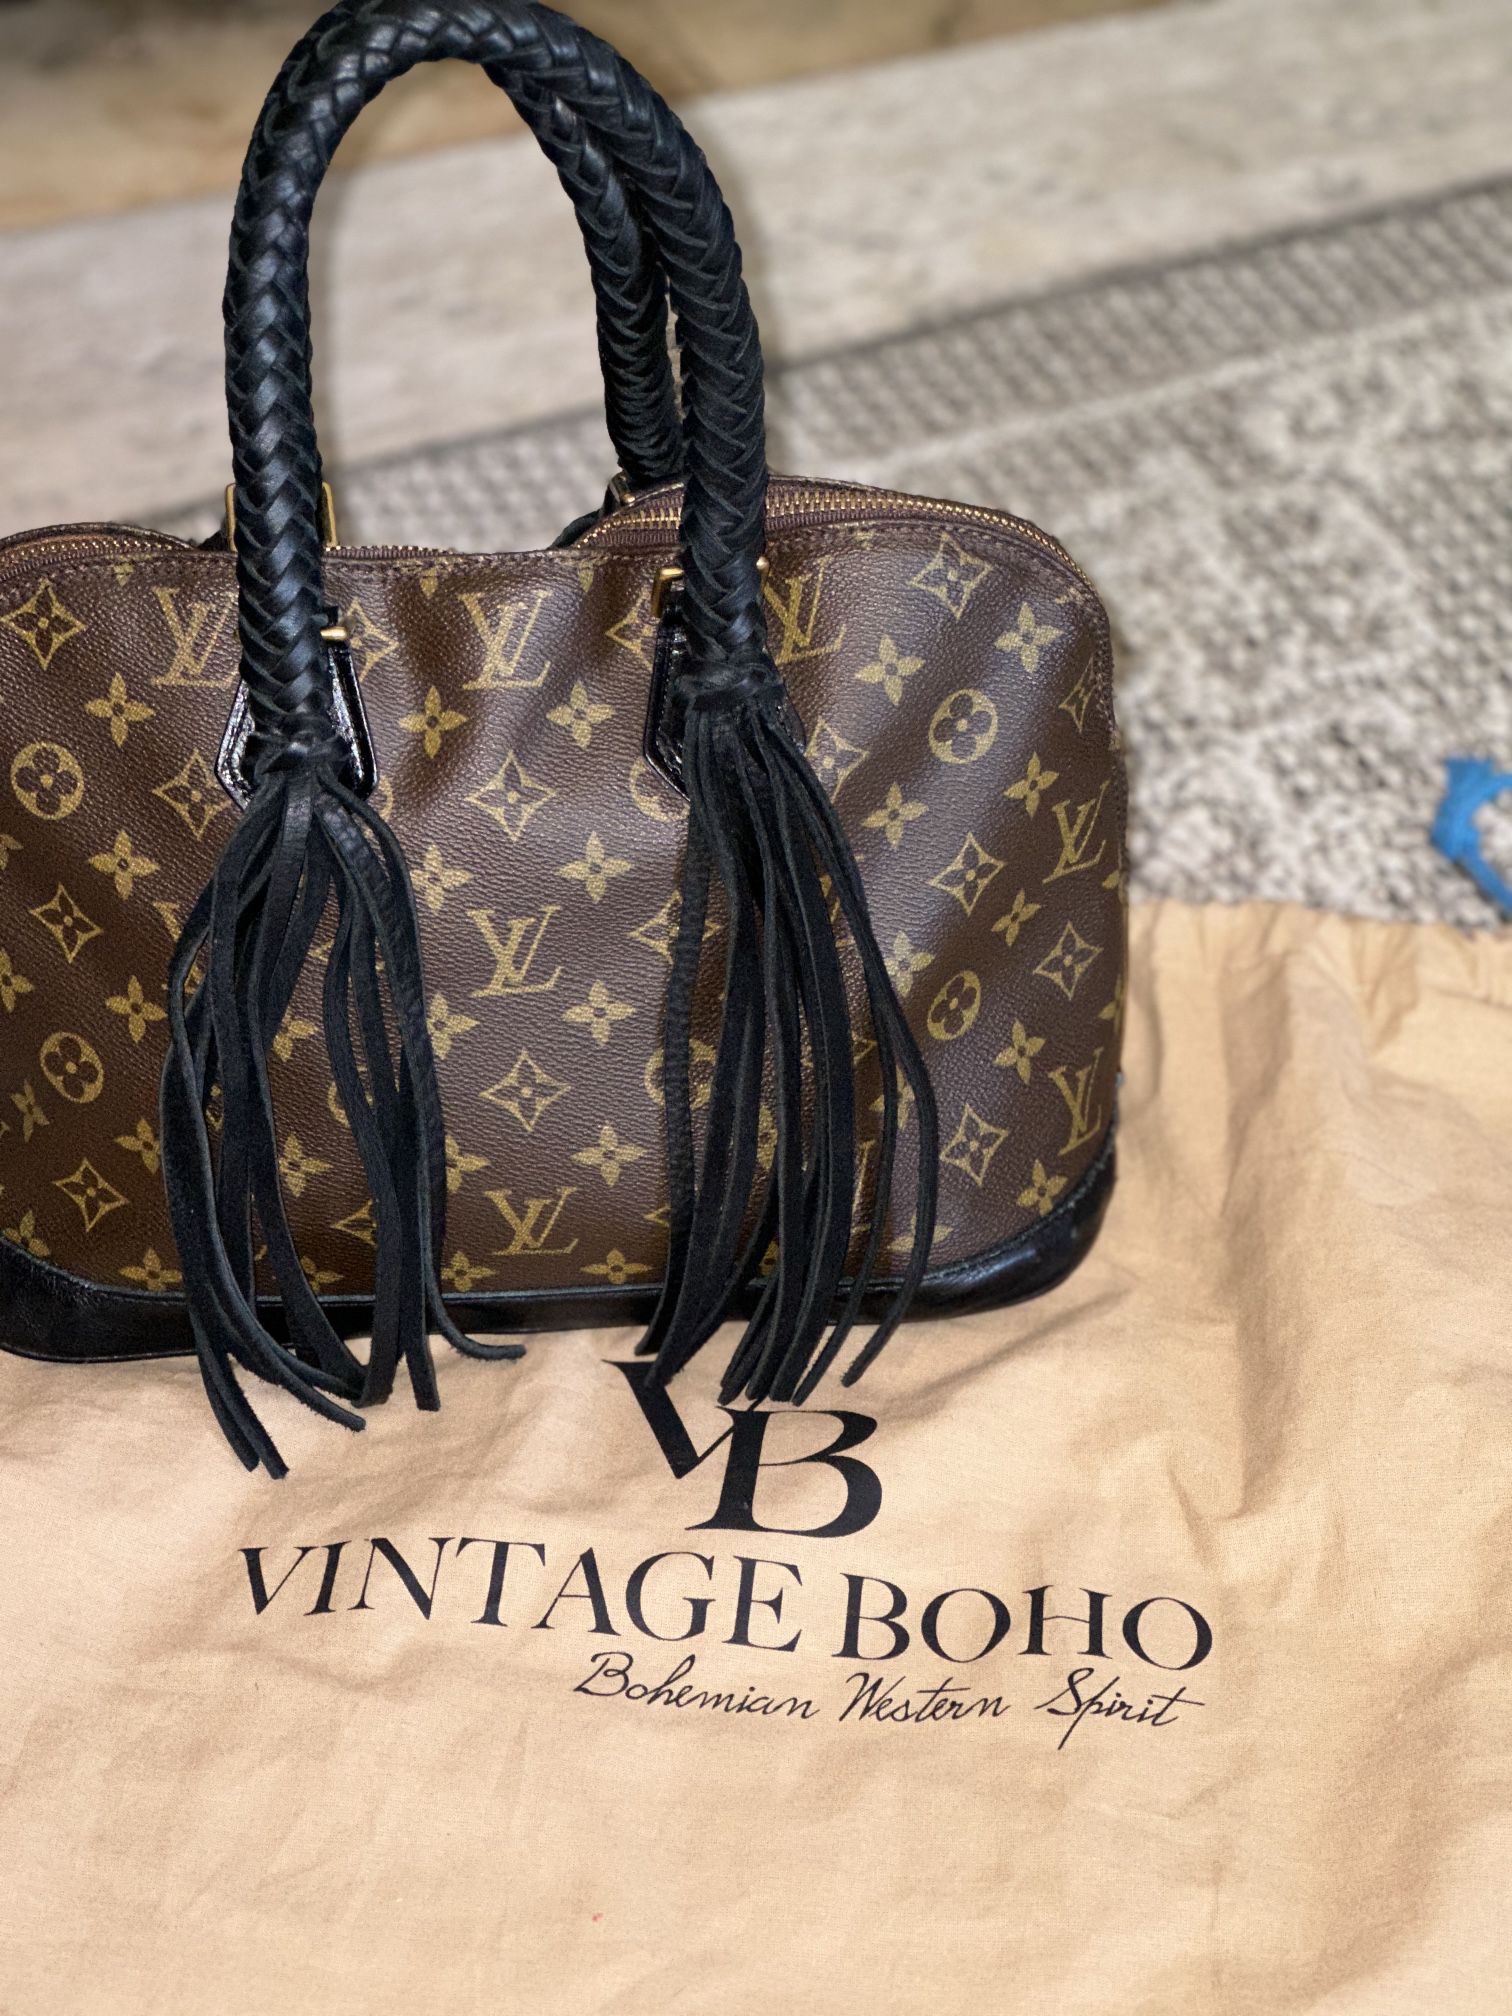 AUTHENTIC LV Vintage Boho Alma MM for Sale in Salinas, CA